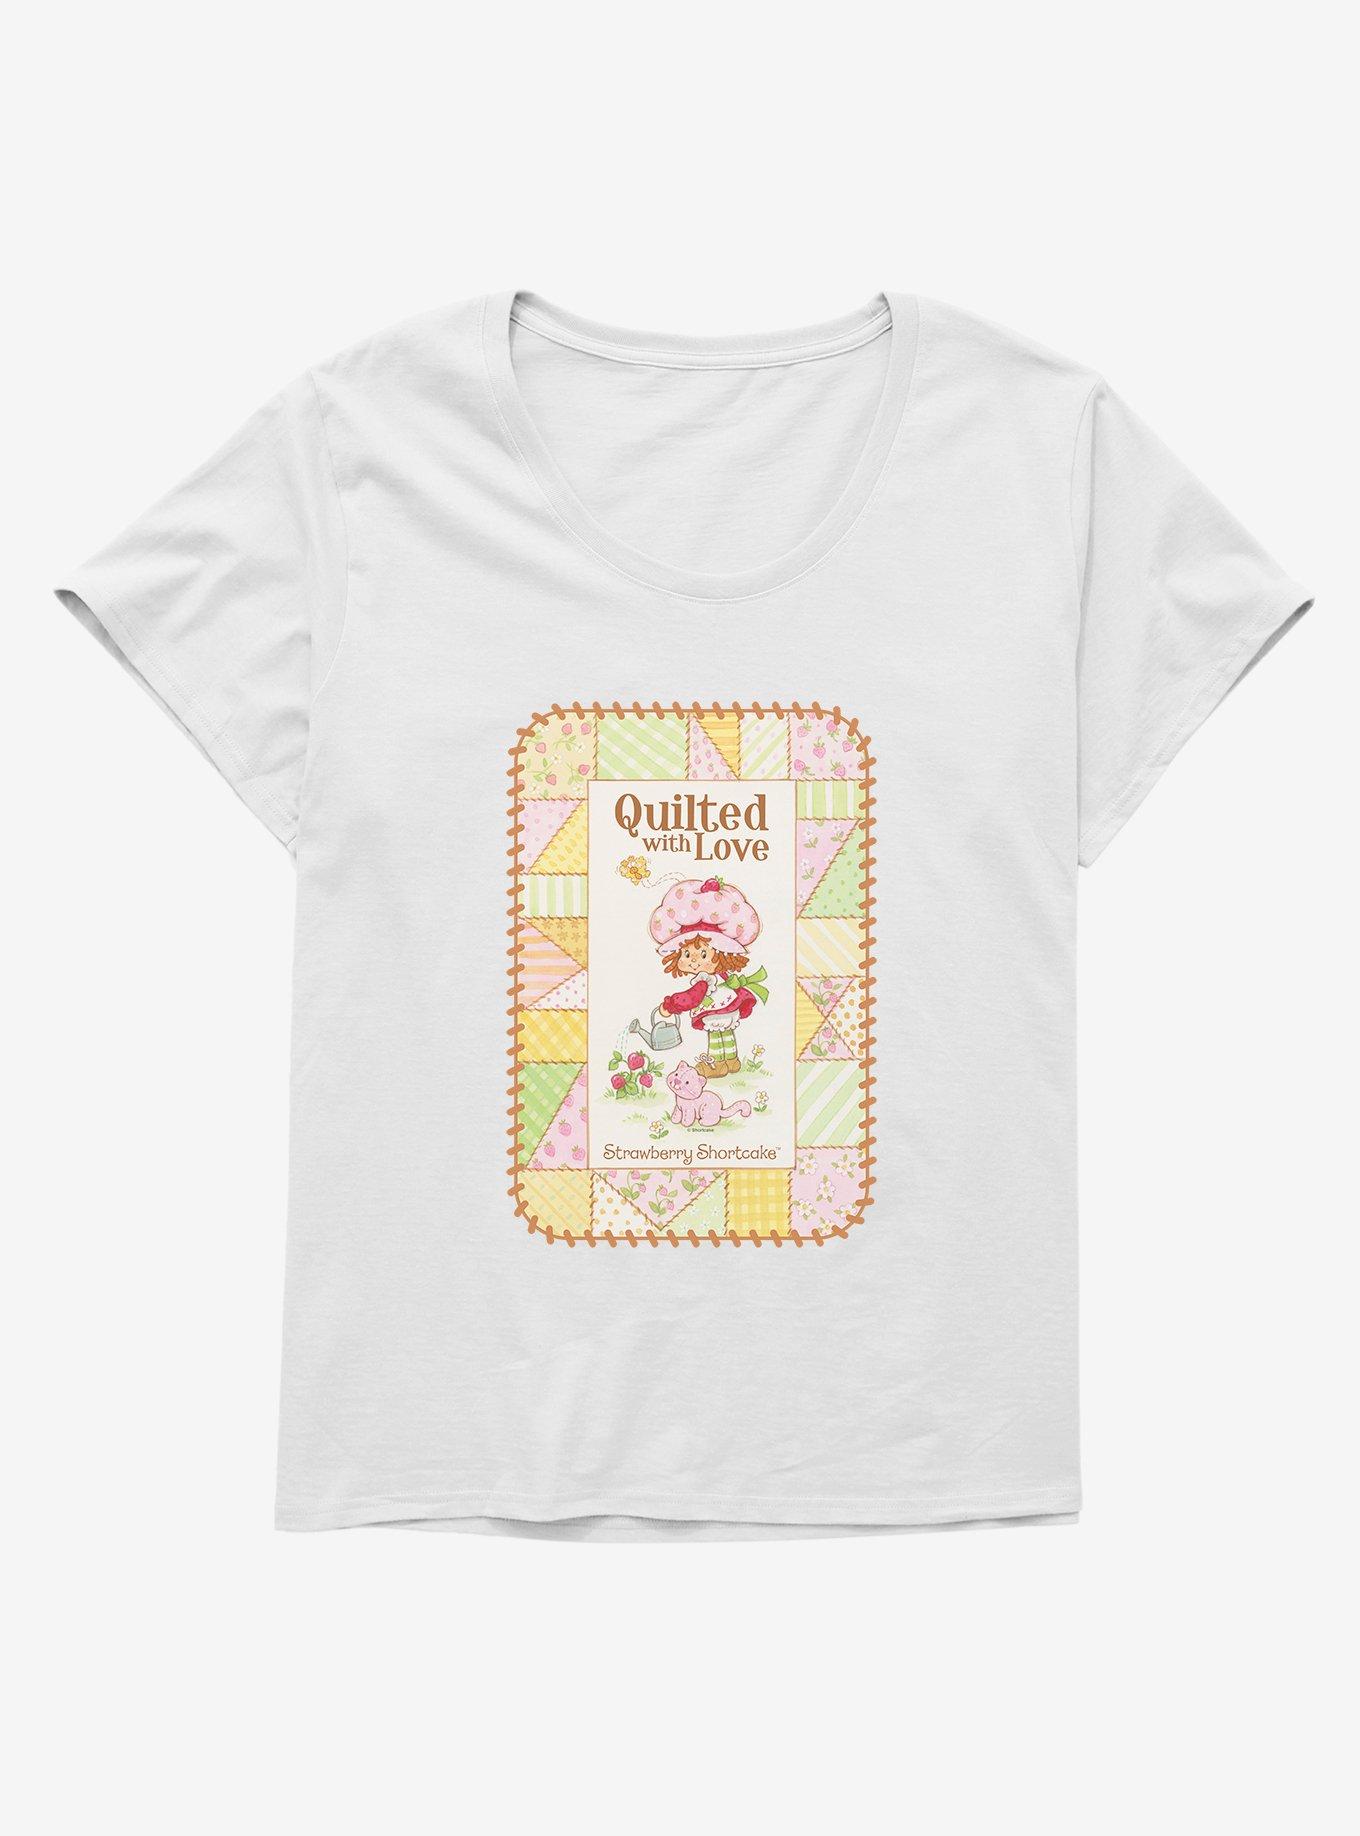 Strawberry Shortcake Quilted With Love Womens T-Shirt Plus Size, WHITE, hi-res